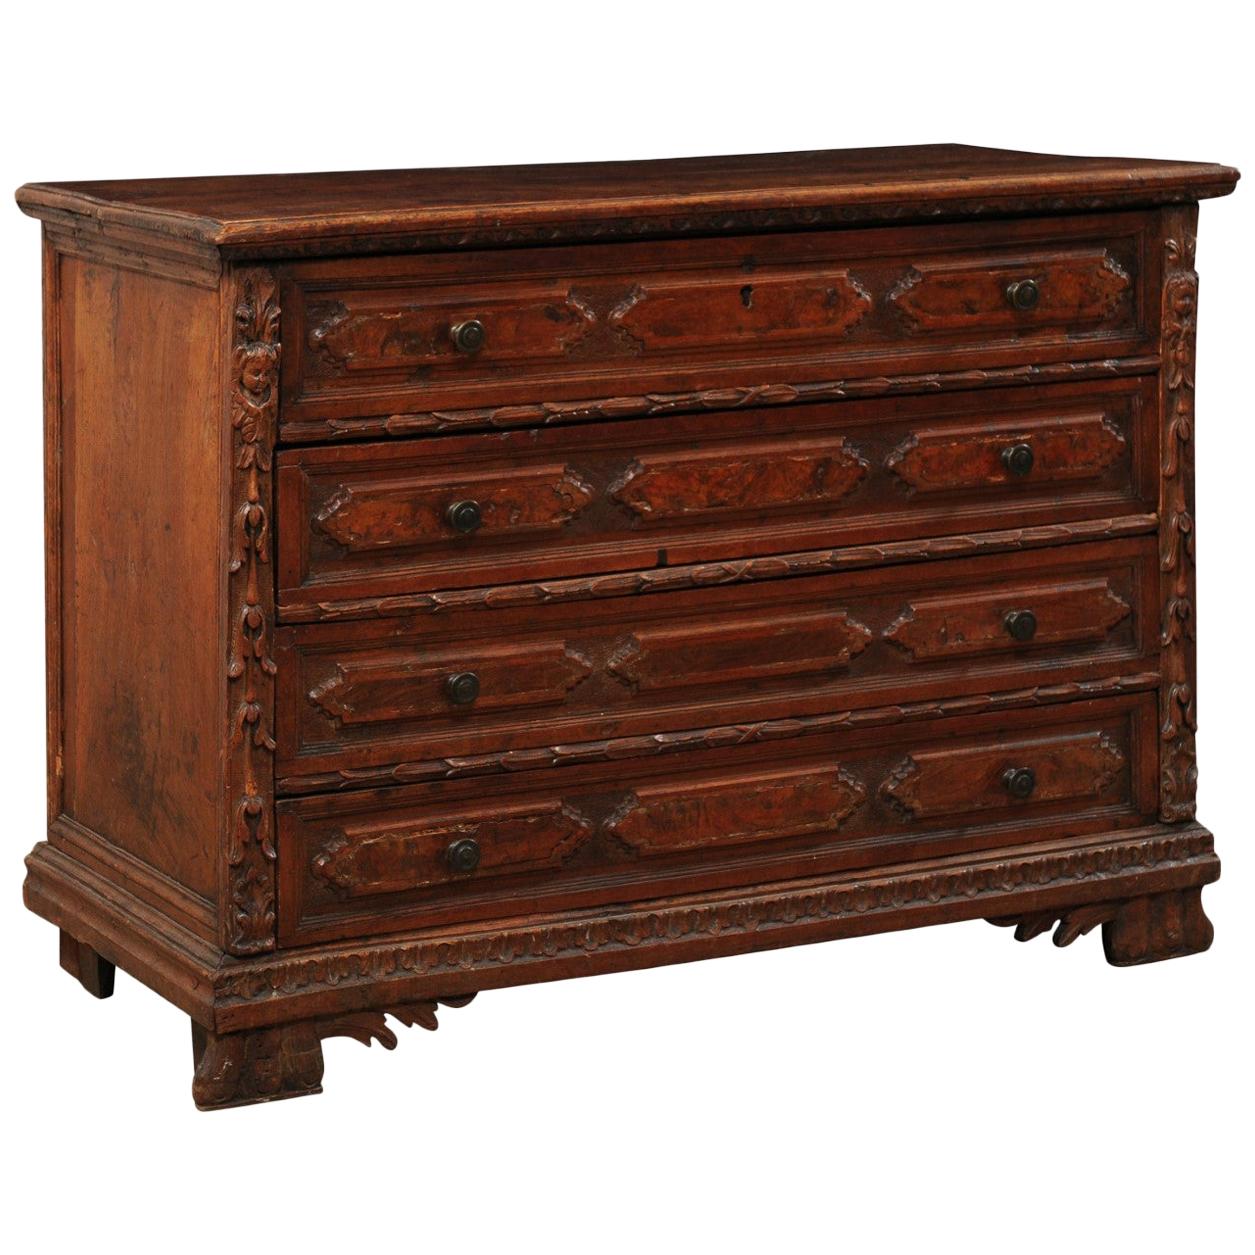 18th Century 4-Drawer Commode with Finely Carved Embellishments and Trimmings For Sale